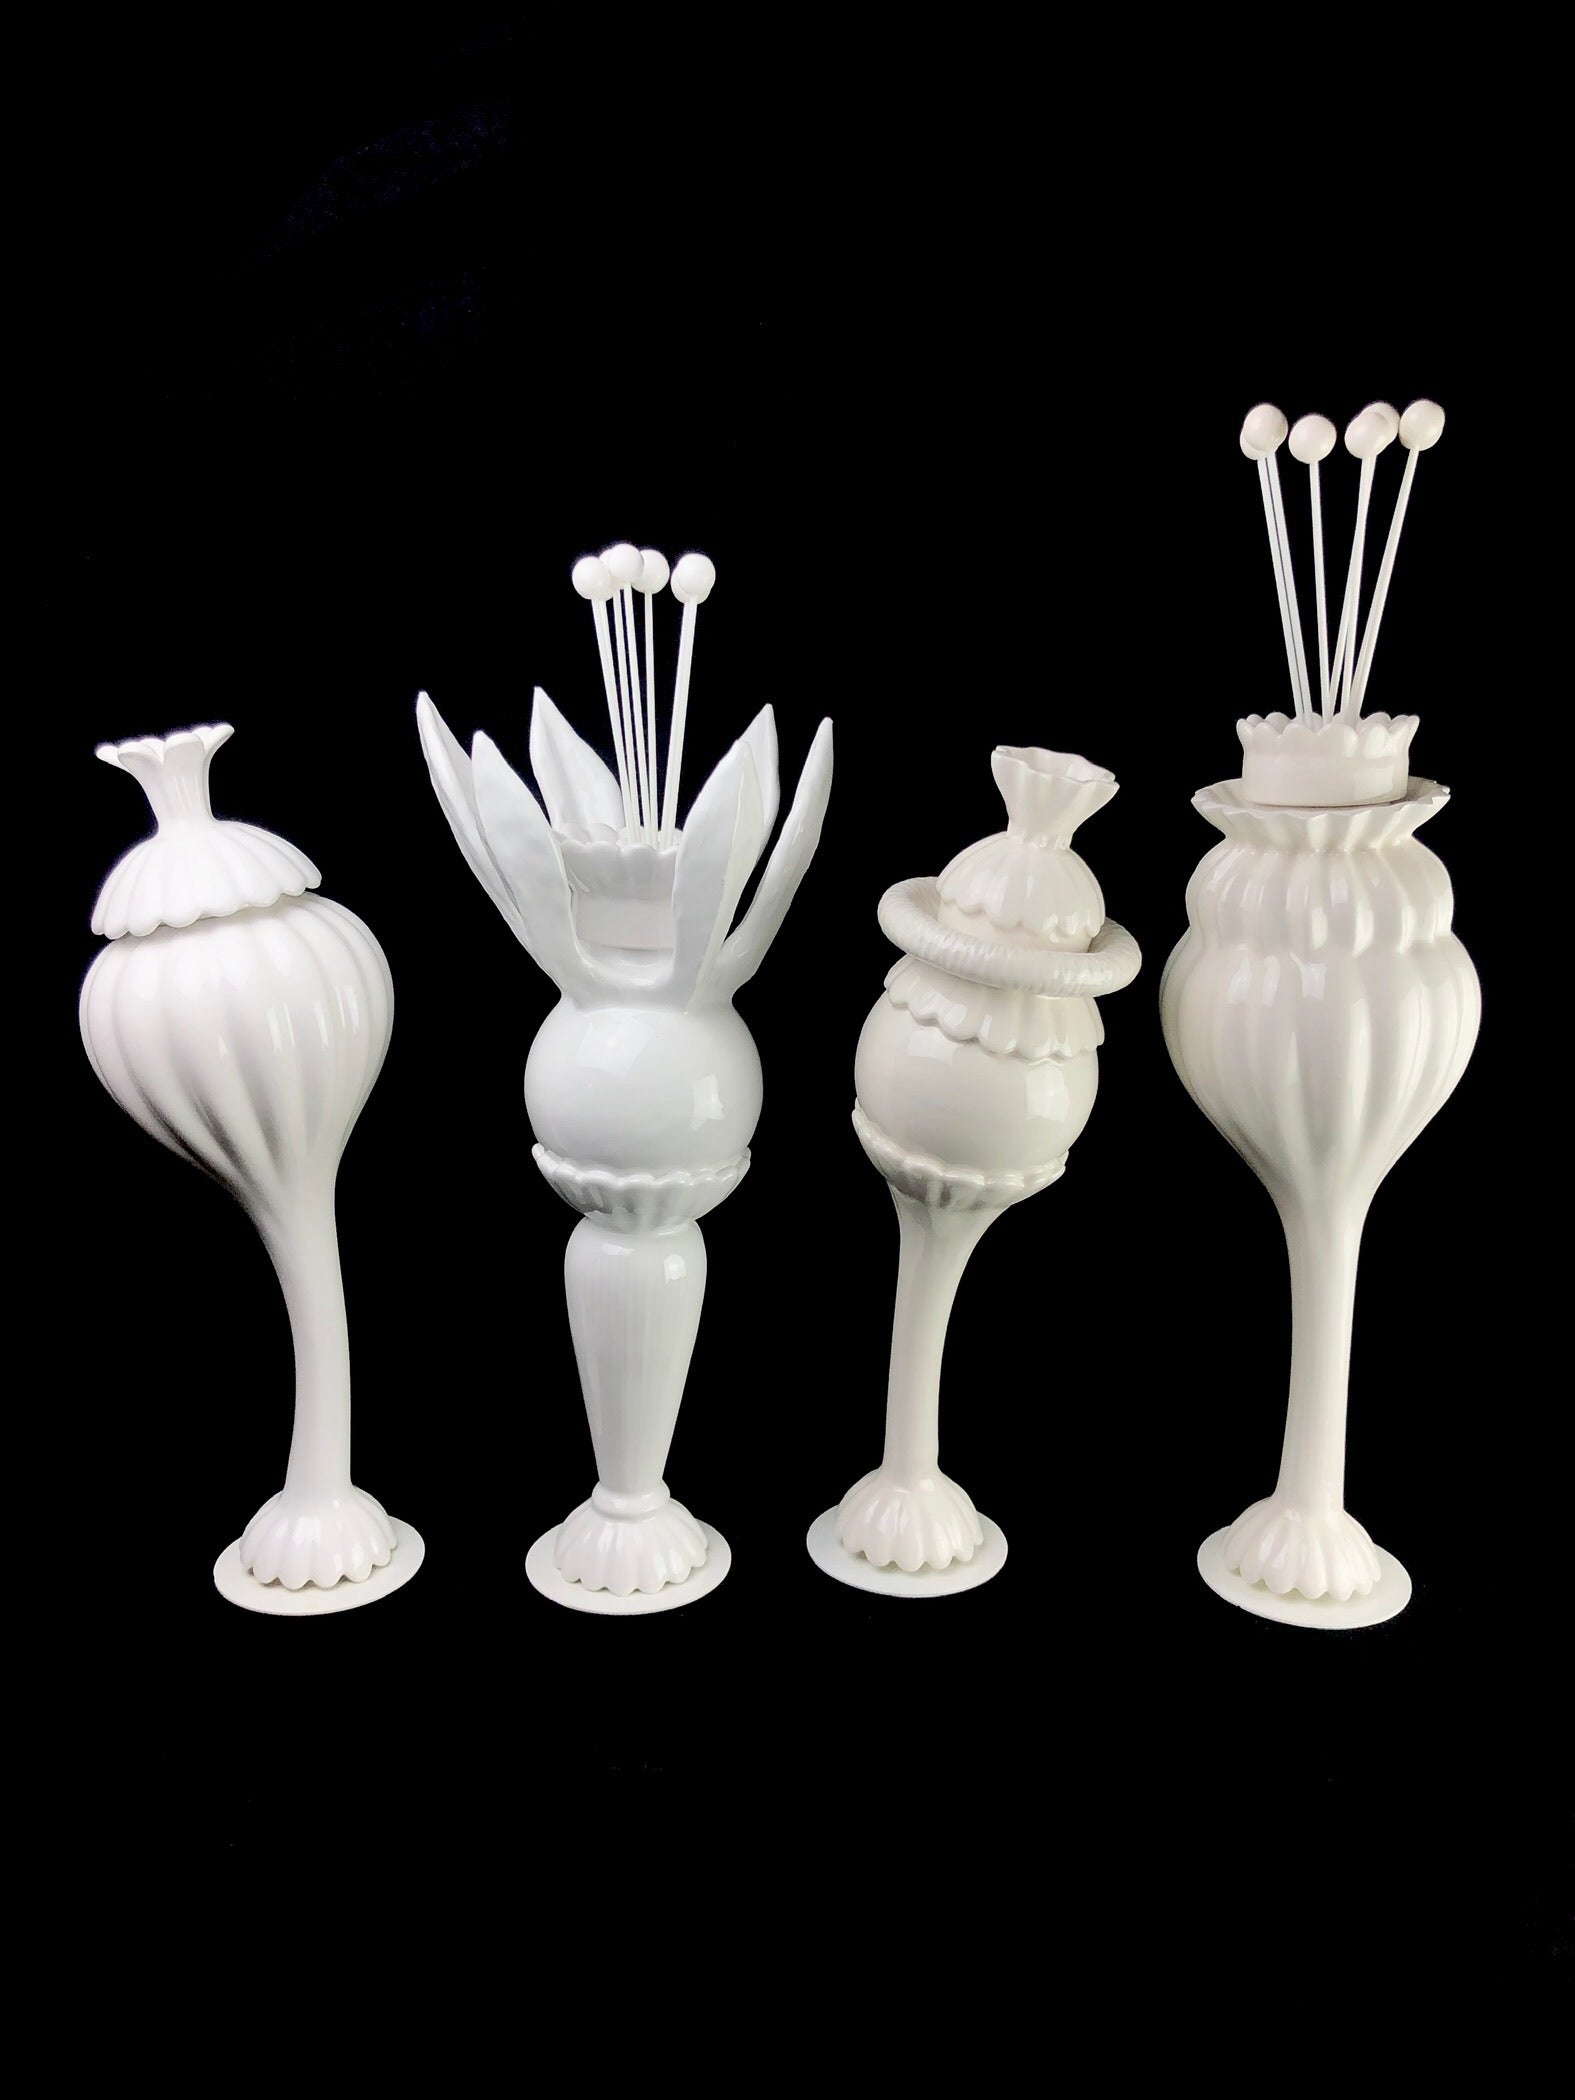 Four different designs of Ceramic Oil Diffusers available